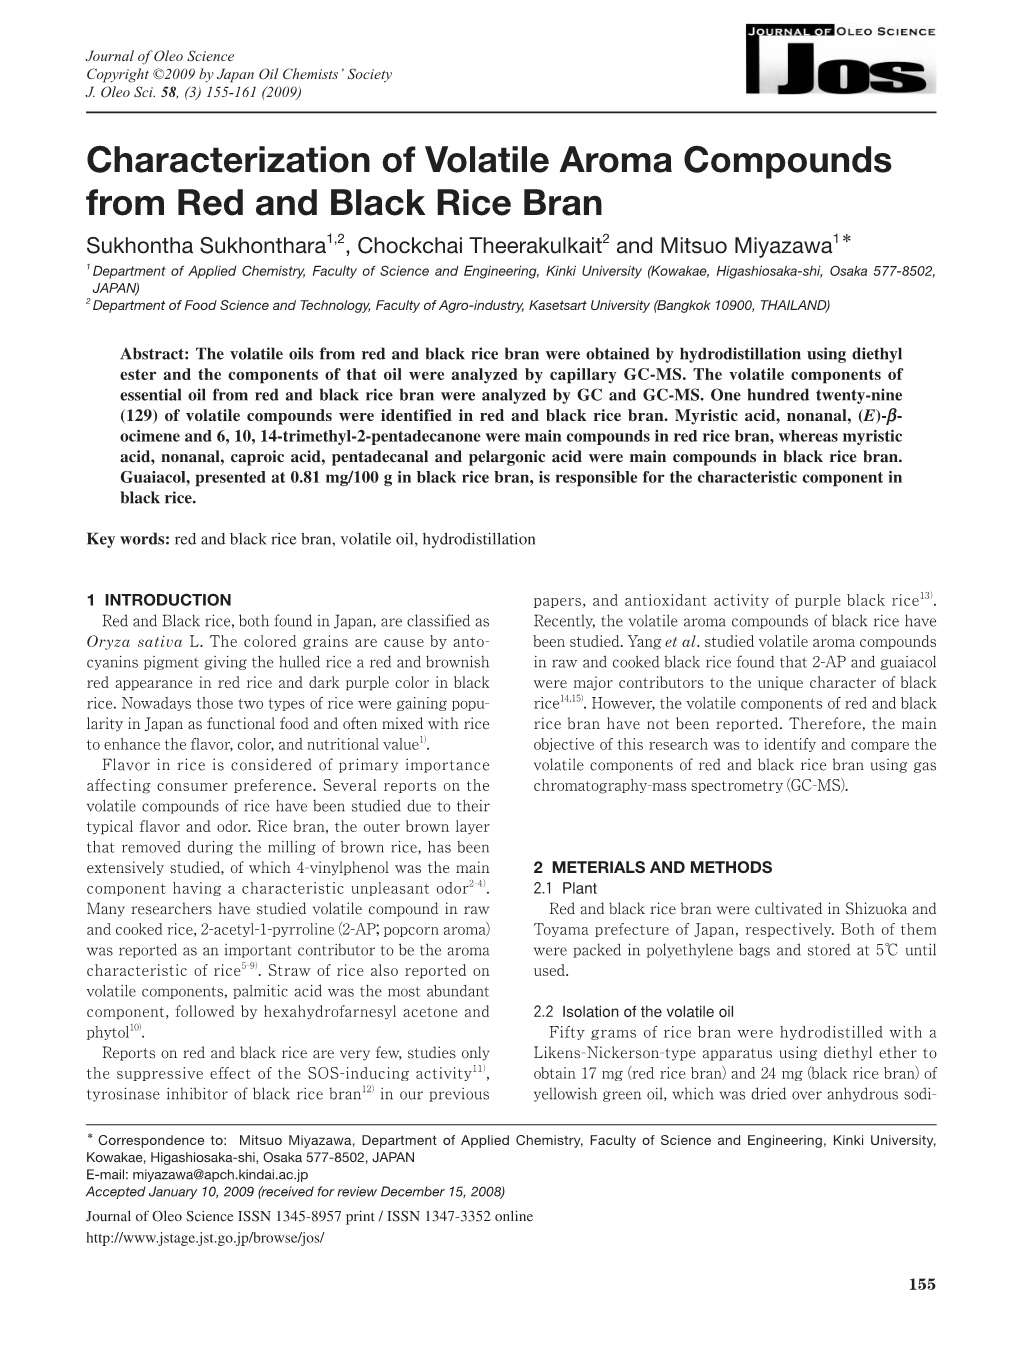 Characterization of Volatile Aroma Compounds from Red and Black